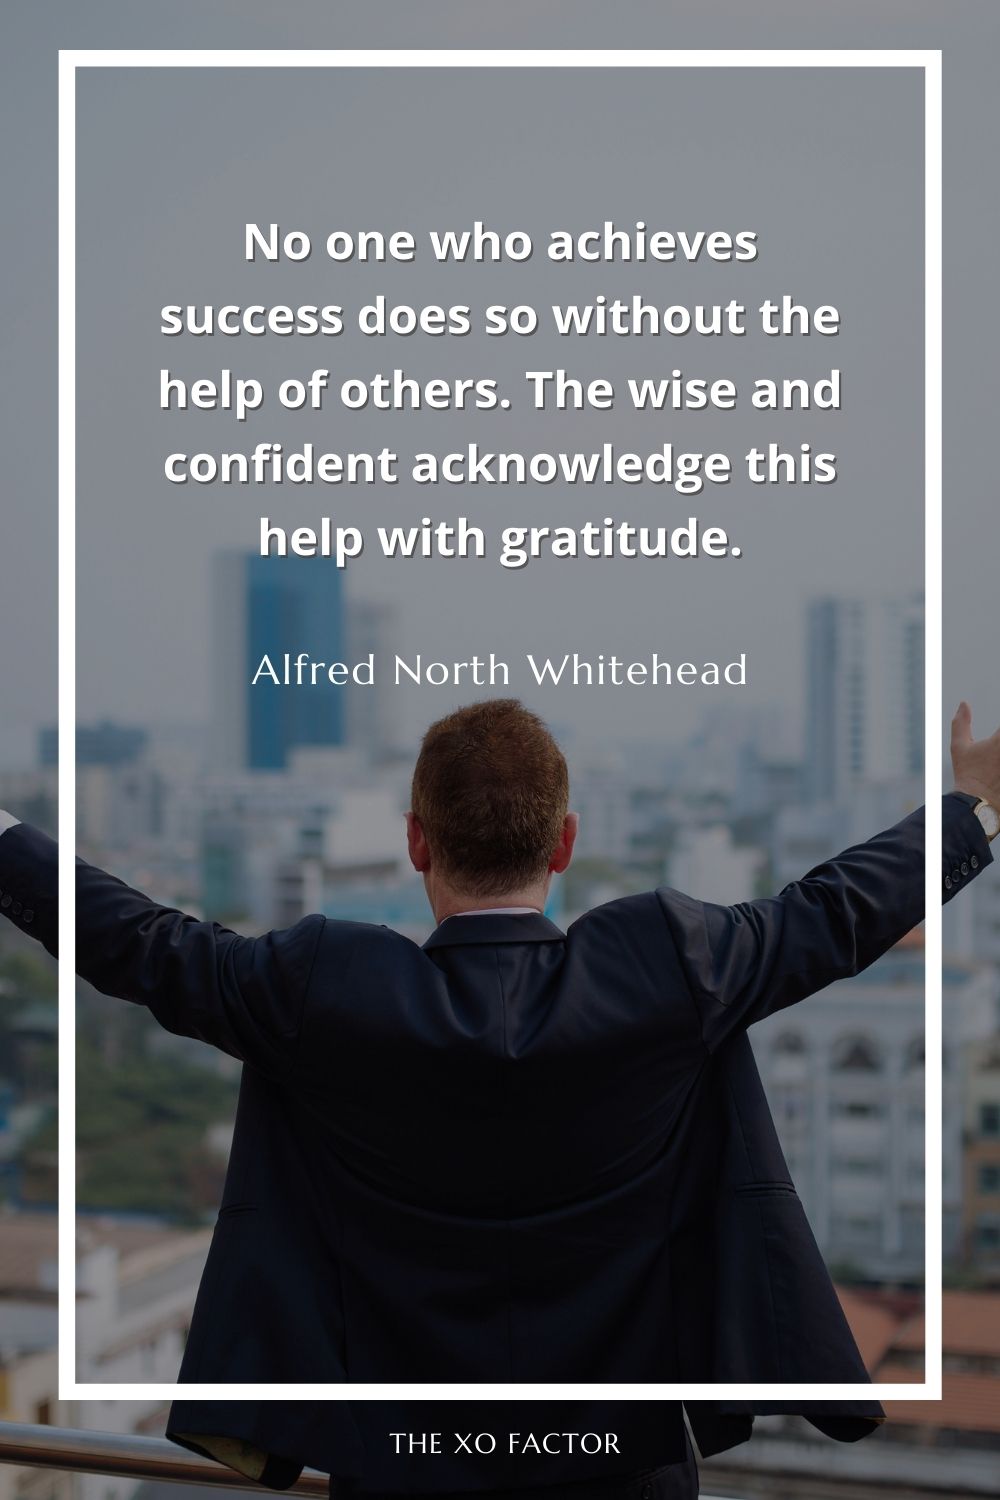 No one who achieves success does so without the help of others. The wise and confident acknowledge this help with gratitude.